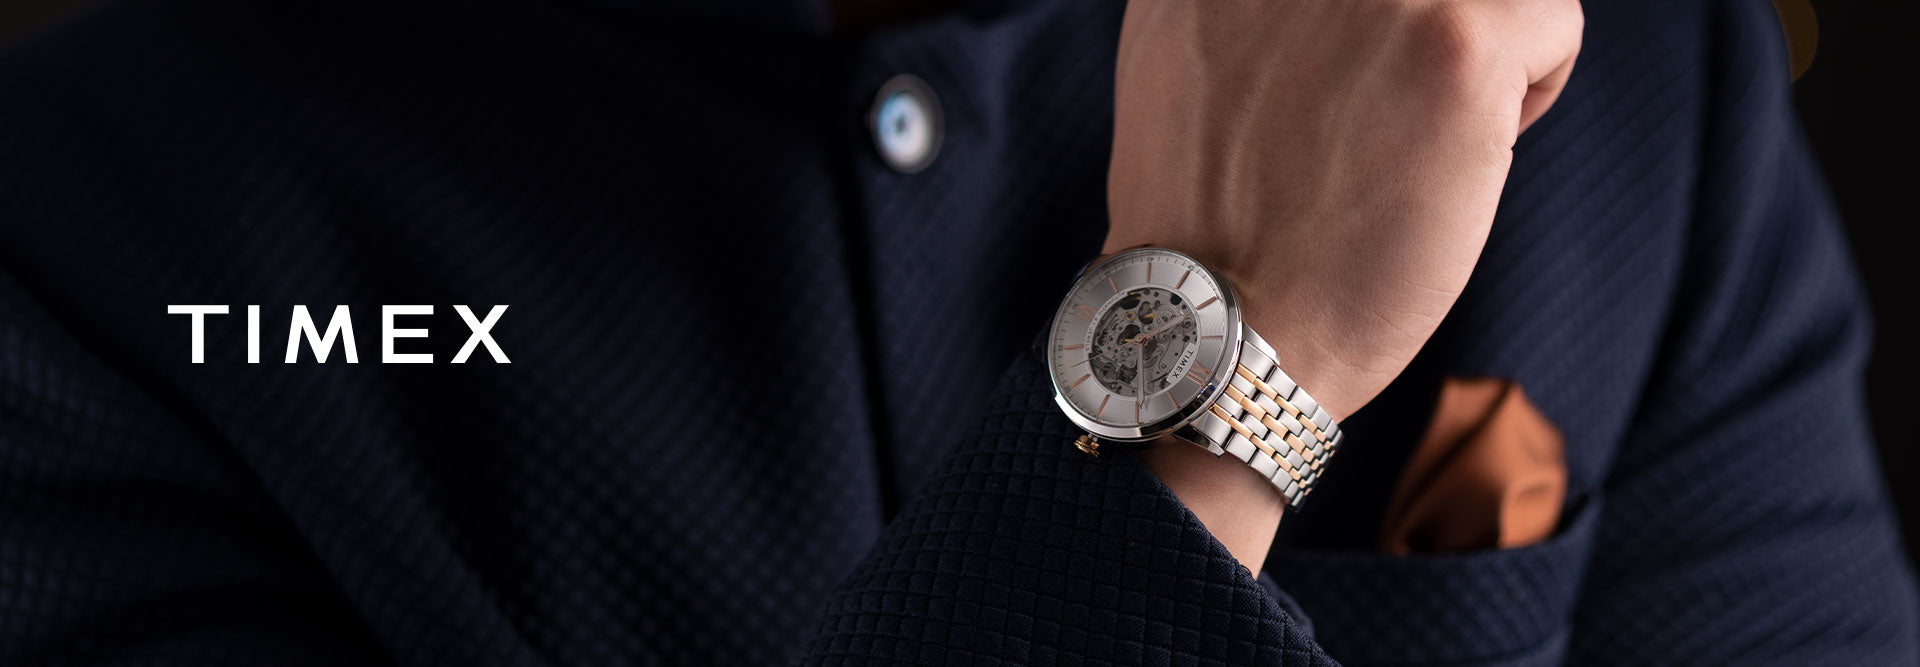 CHANGEABLE WATCH ⌚ | Gallery posted by ANITA | Lemon8